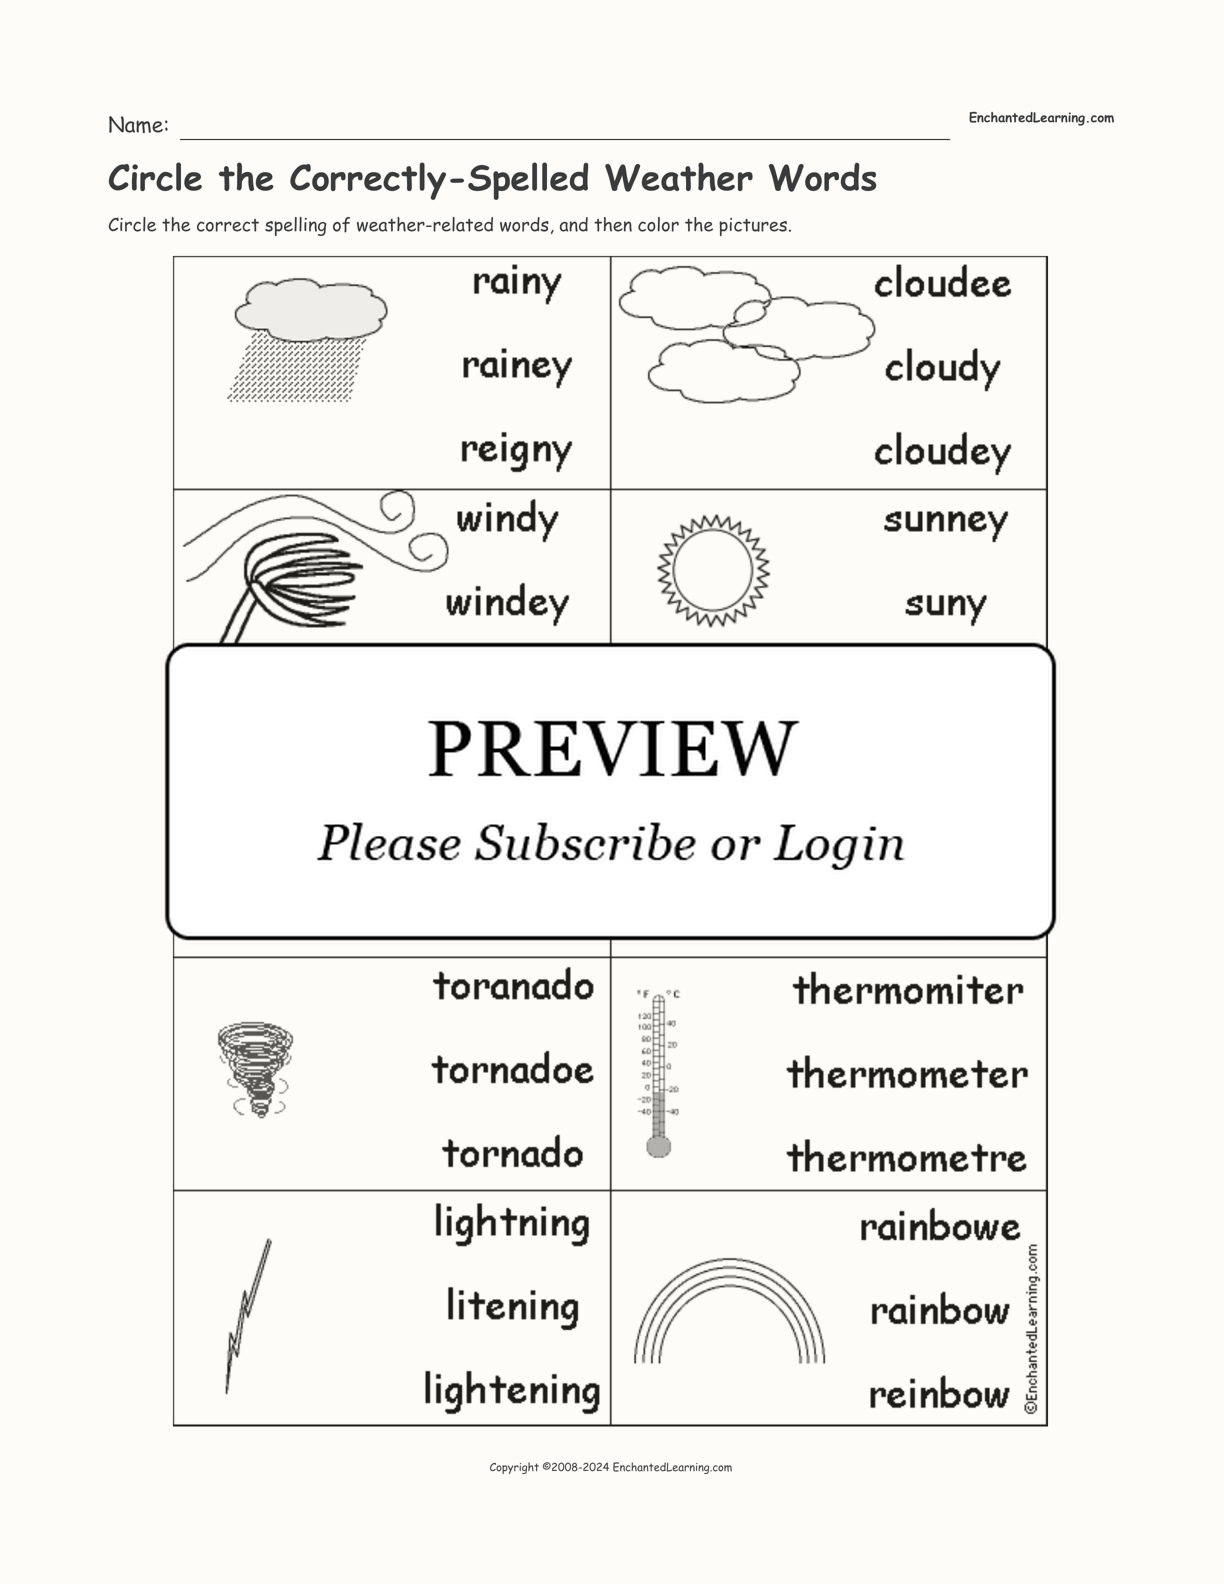 Circle the Correctly-Spelled Weather Words interactive worksheet page 1